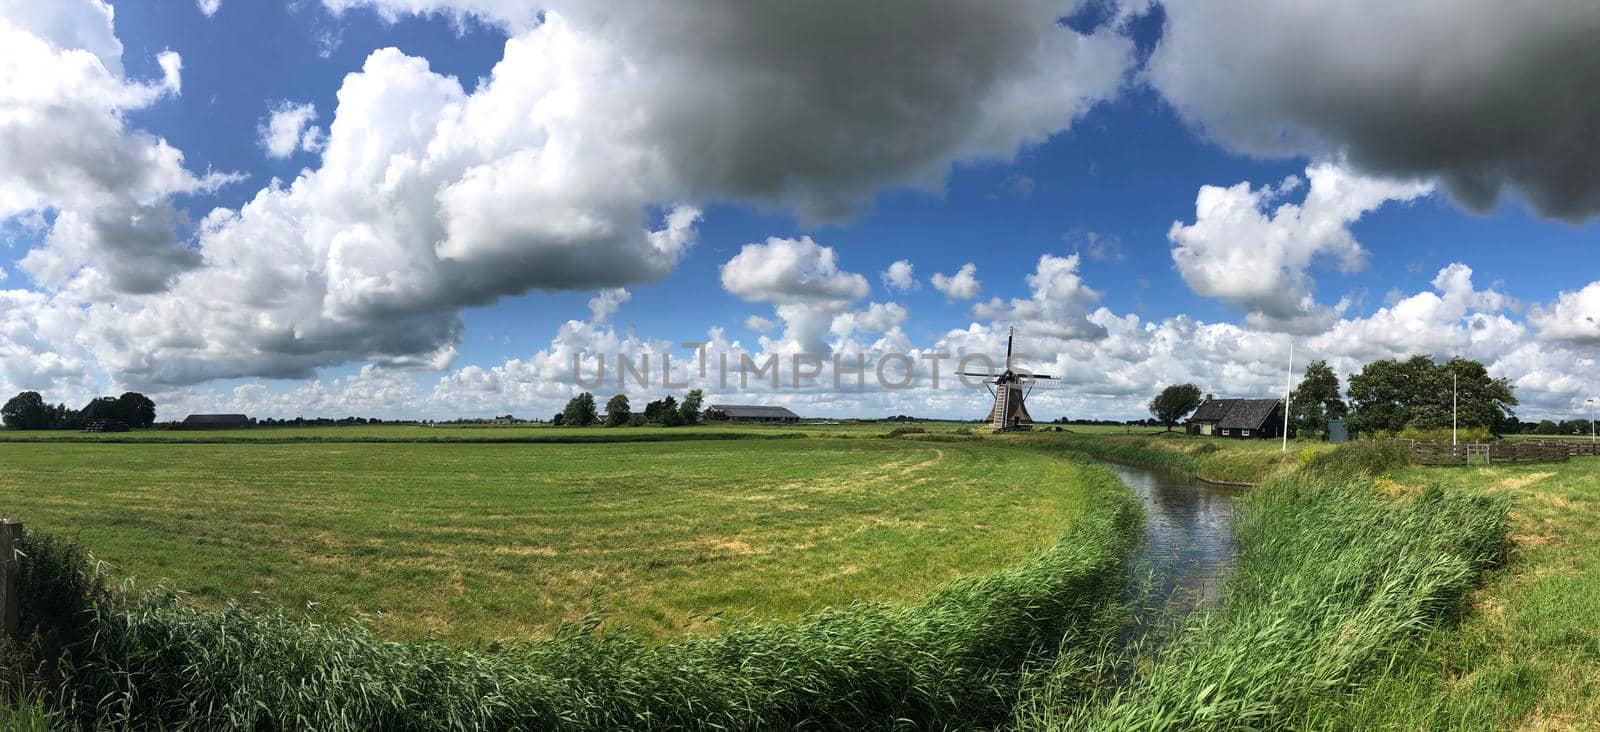 Panorama from a windmill in Winsum by traveltelly